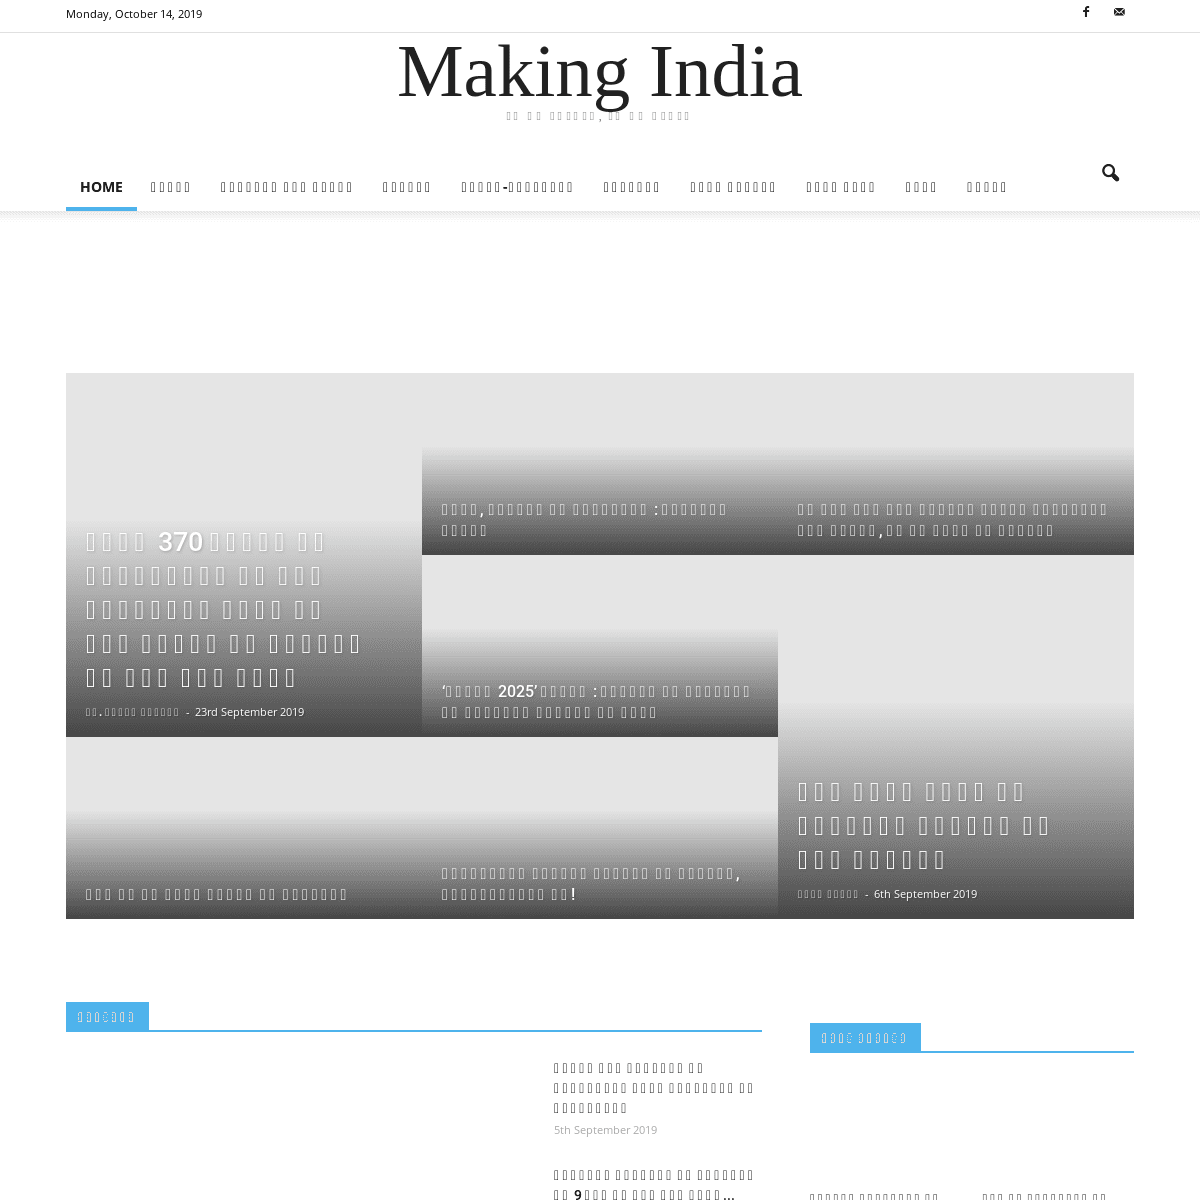 A complete backup of makingindiaonline.in